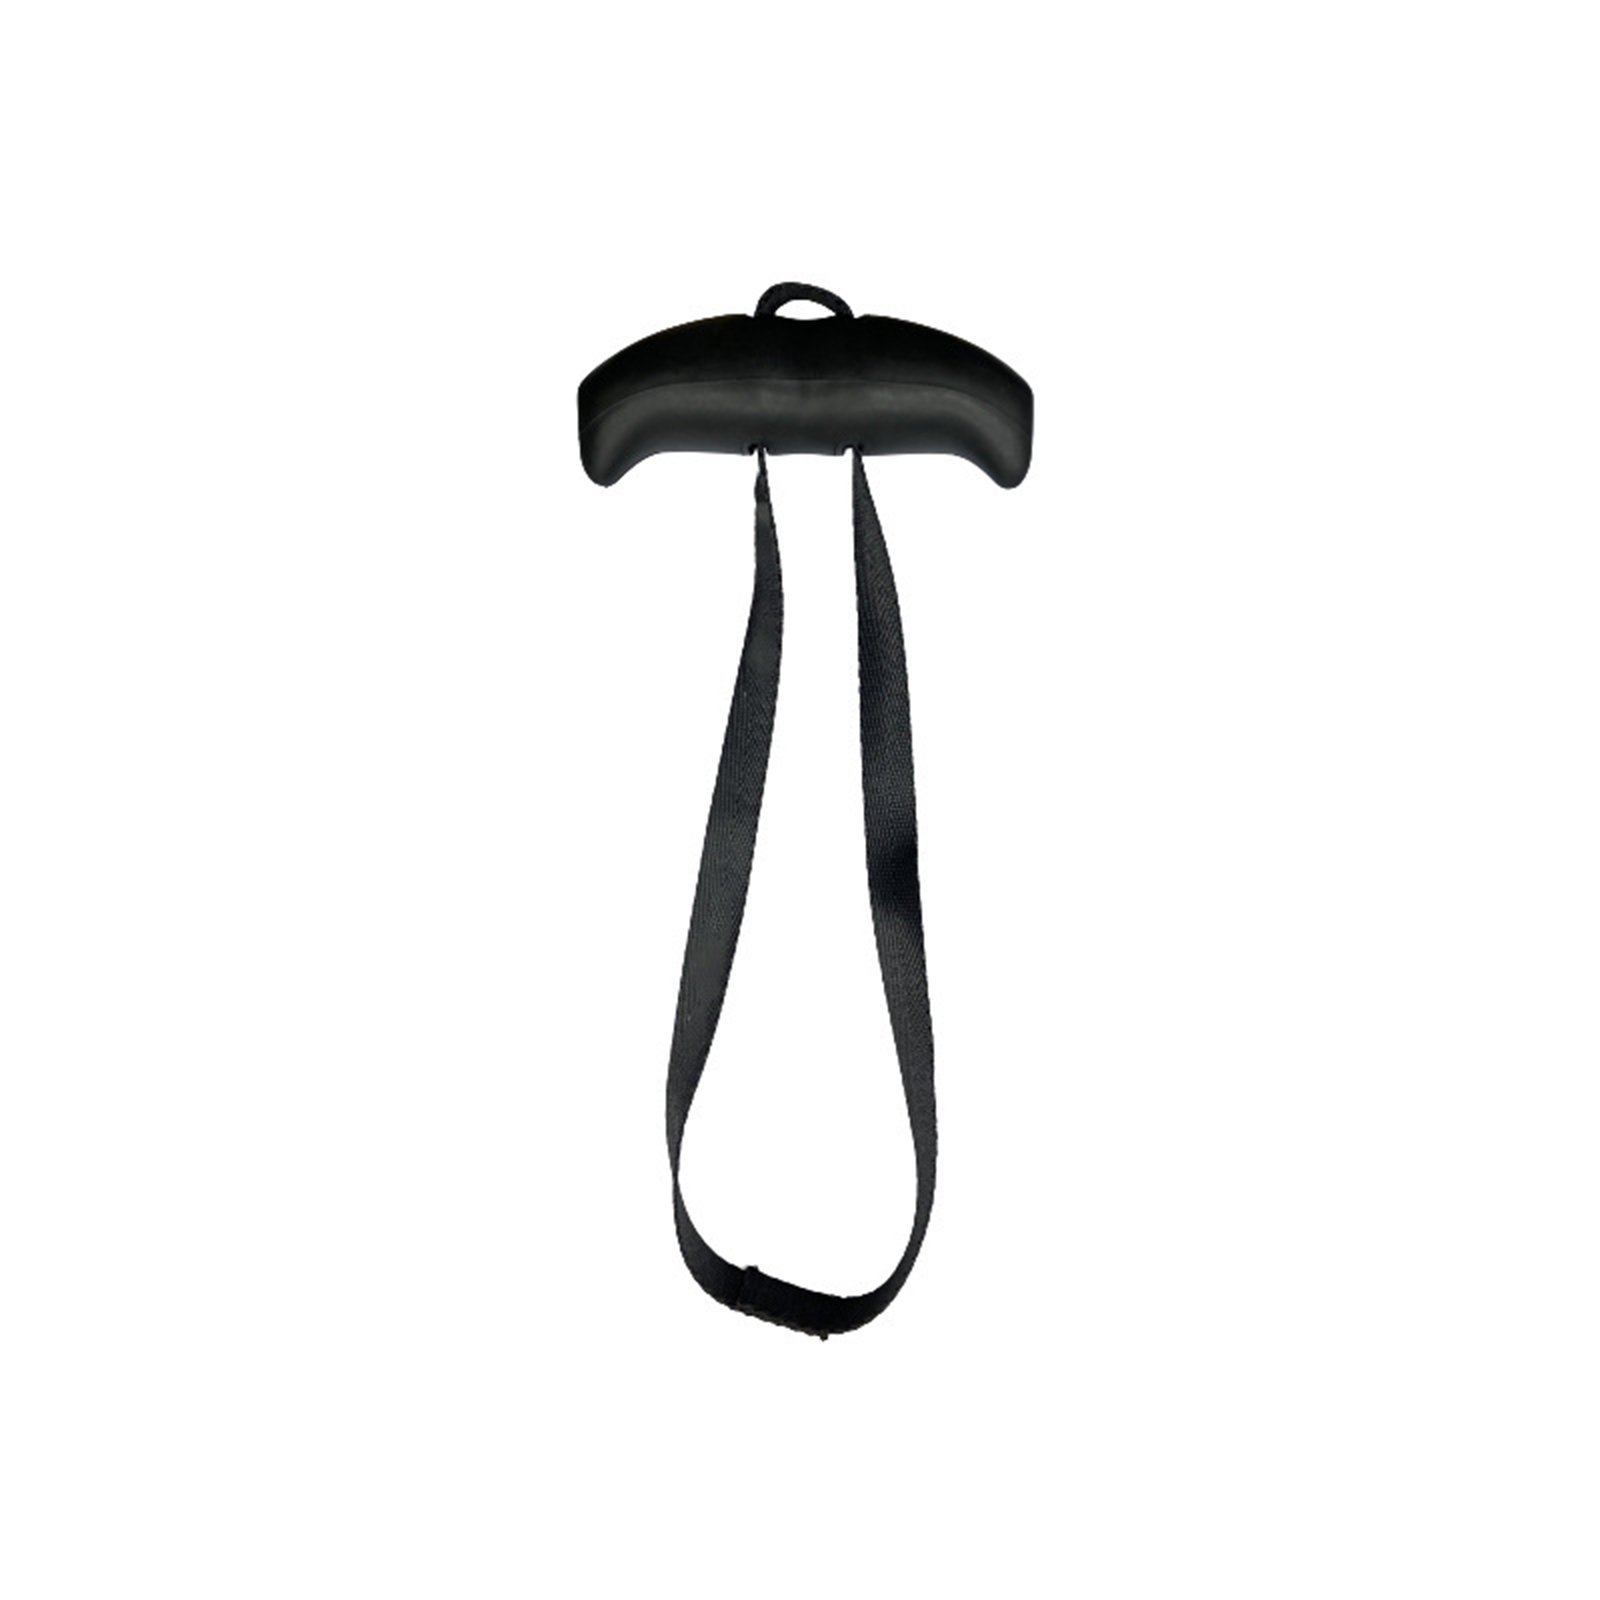 Pull Up Handles Ergonomic Exercise Resistance Band Tranining Grip Handles For Home Gym Pull-up Bars Barbells Black [horns]